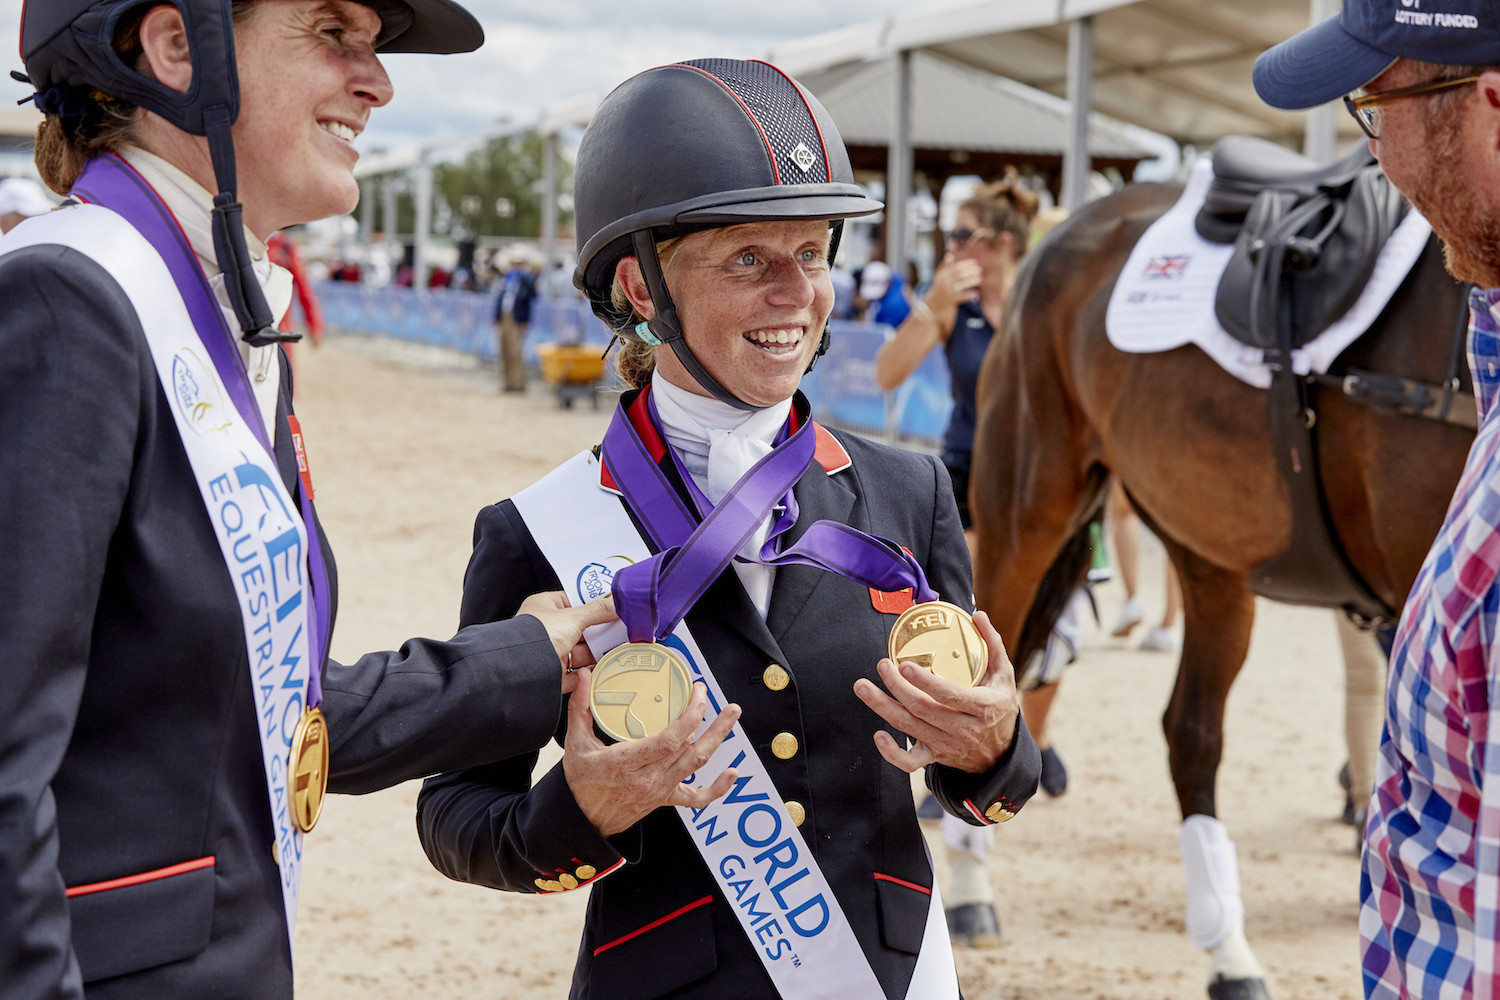 Britain celebrate team and individual eventing titles at World Equestrian Games 